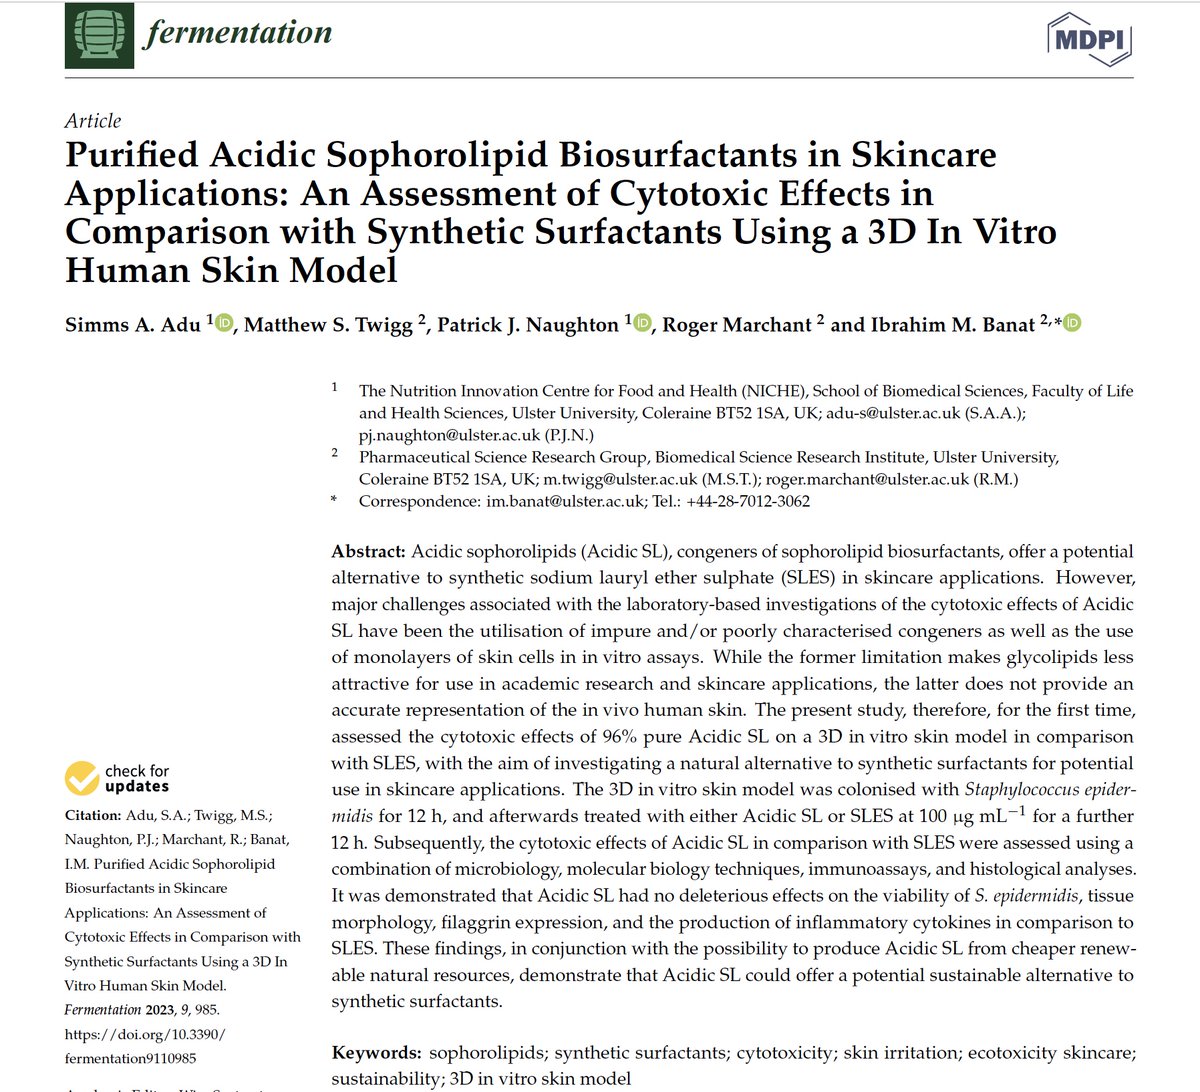 More than delighted to share our latest publication on using a 3D in-vitro human skin model to assess the cytotoxic effects of Purified Acidic #Sophorolipid #Biosurfactants for potential use in #skincare applications.